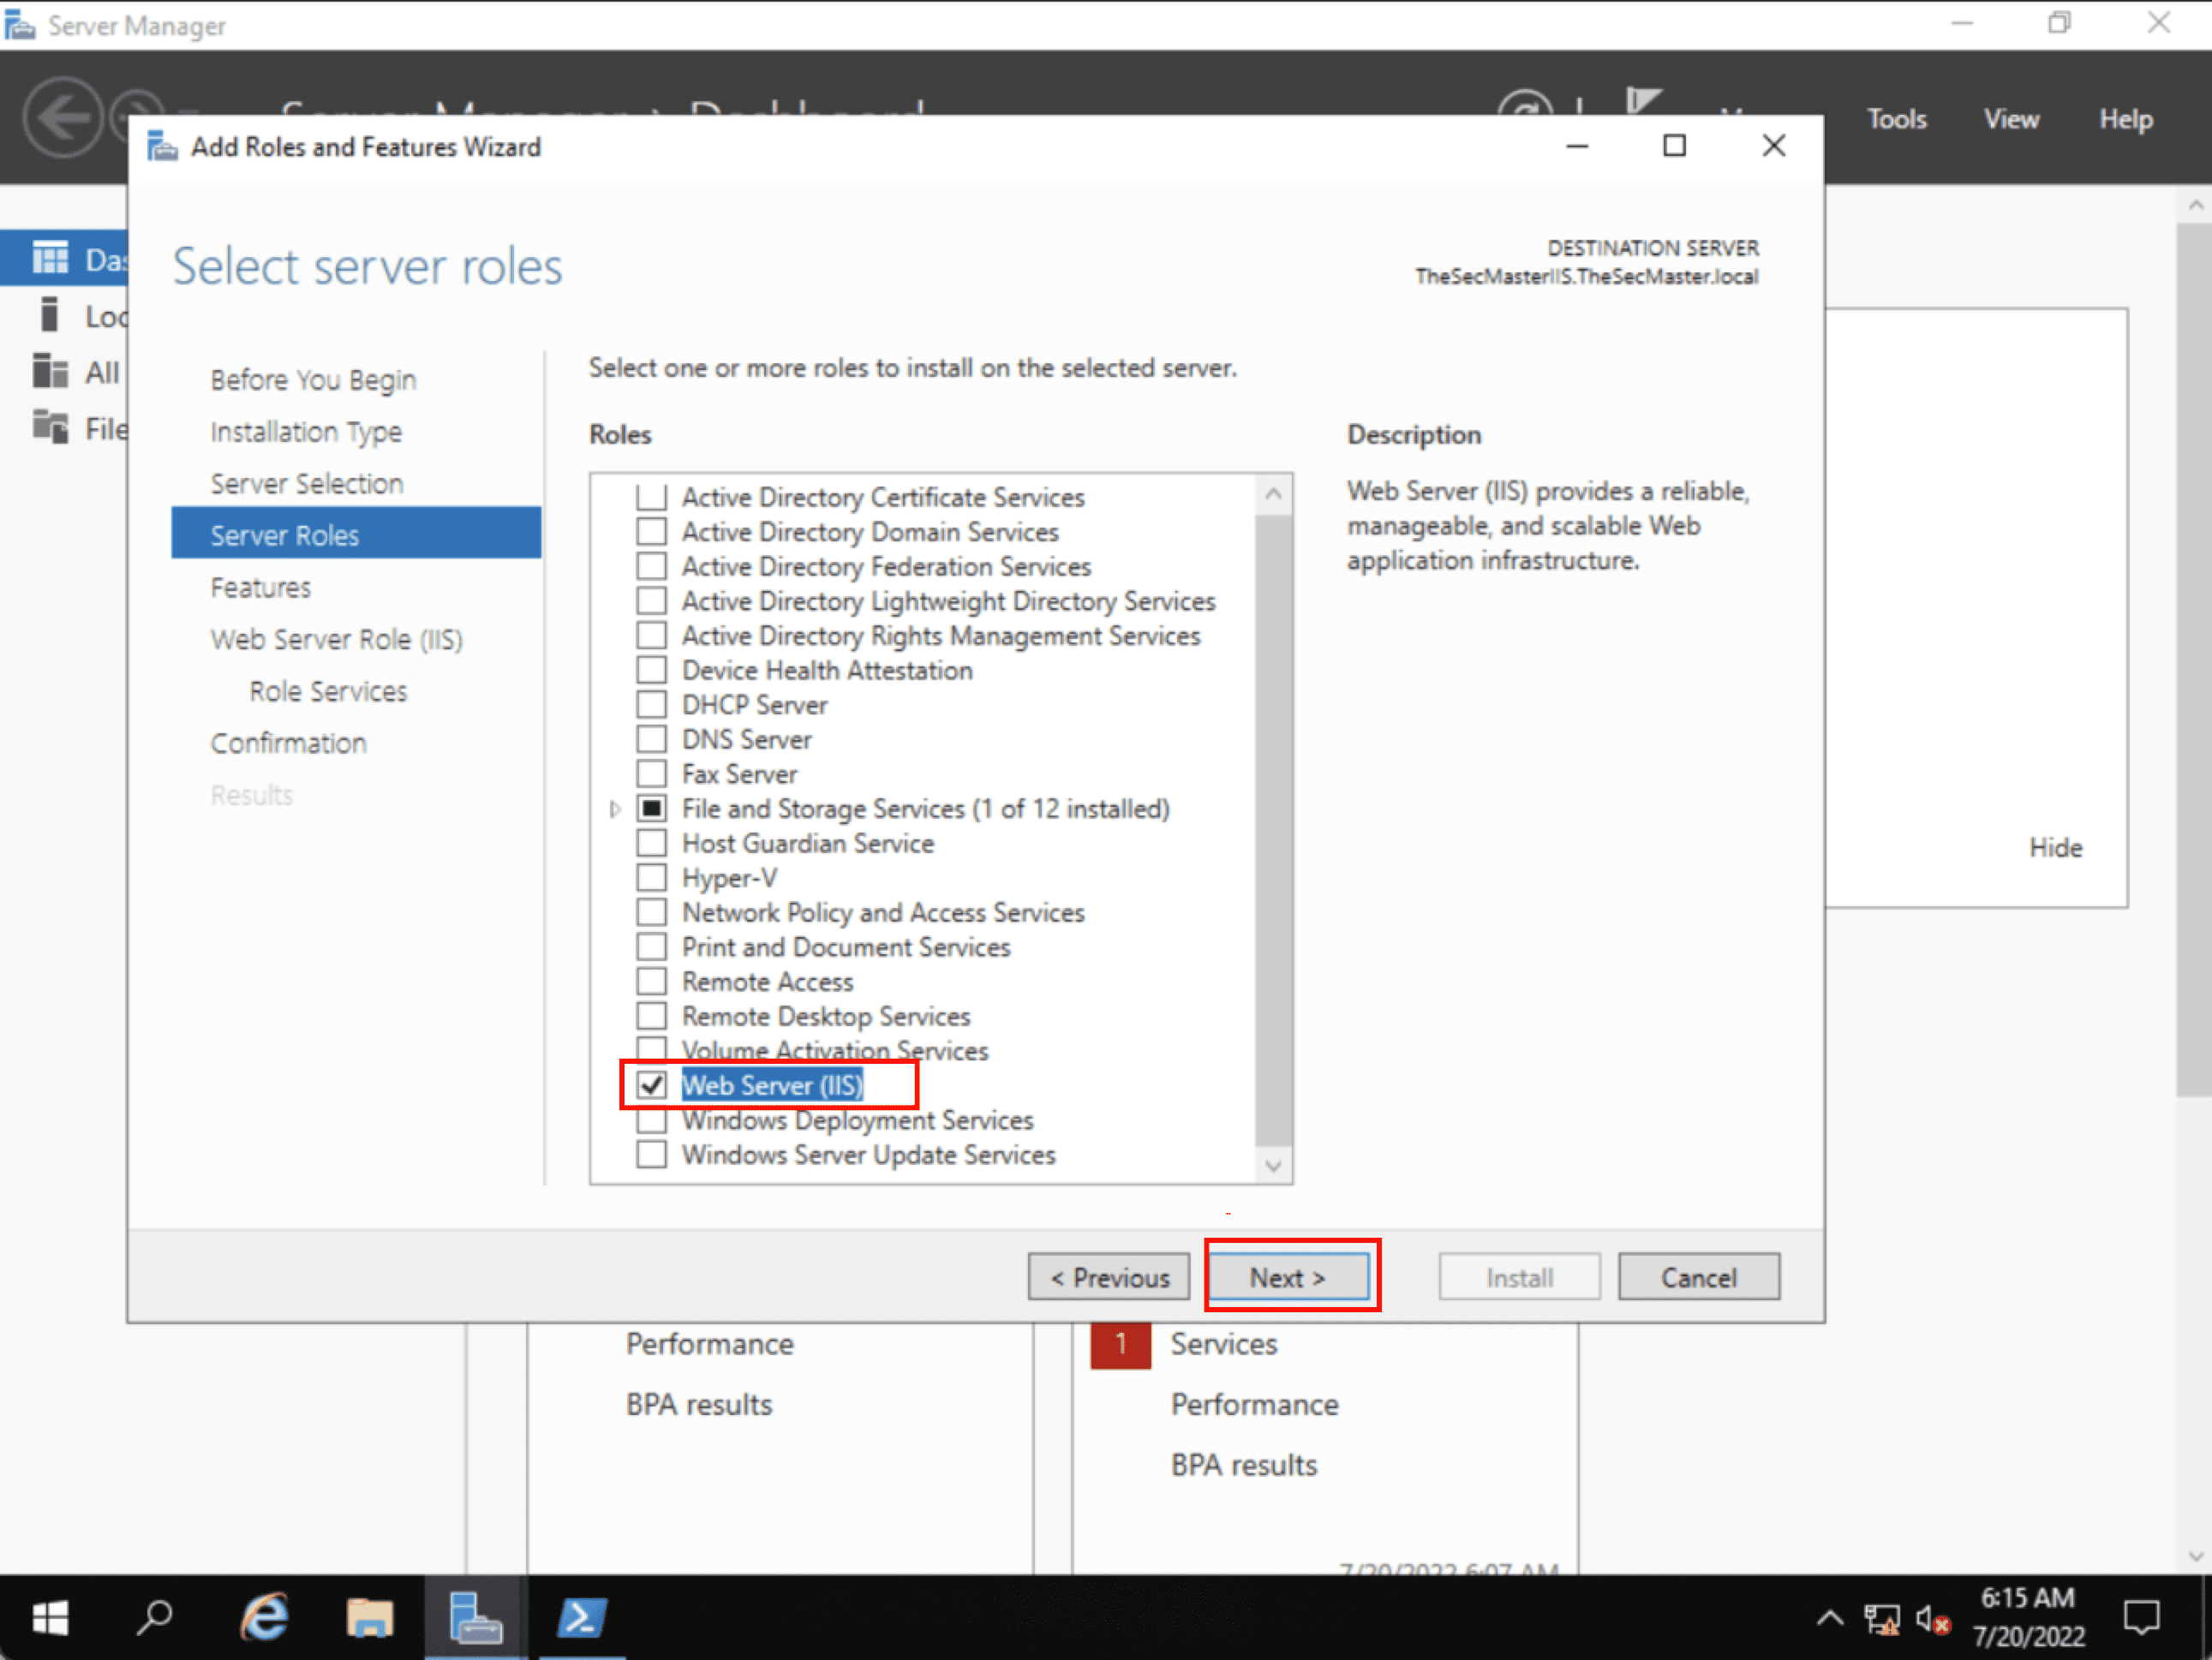 Select The Roles To Install Iis On The Selected Server